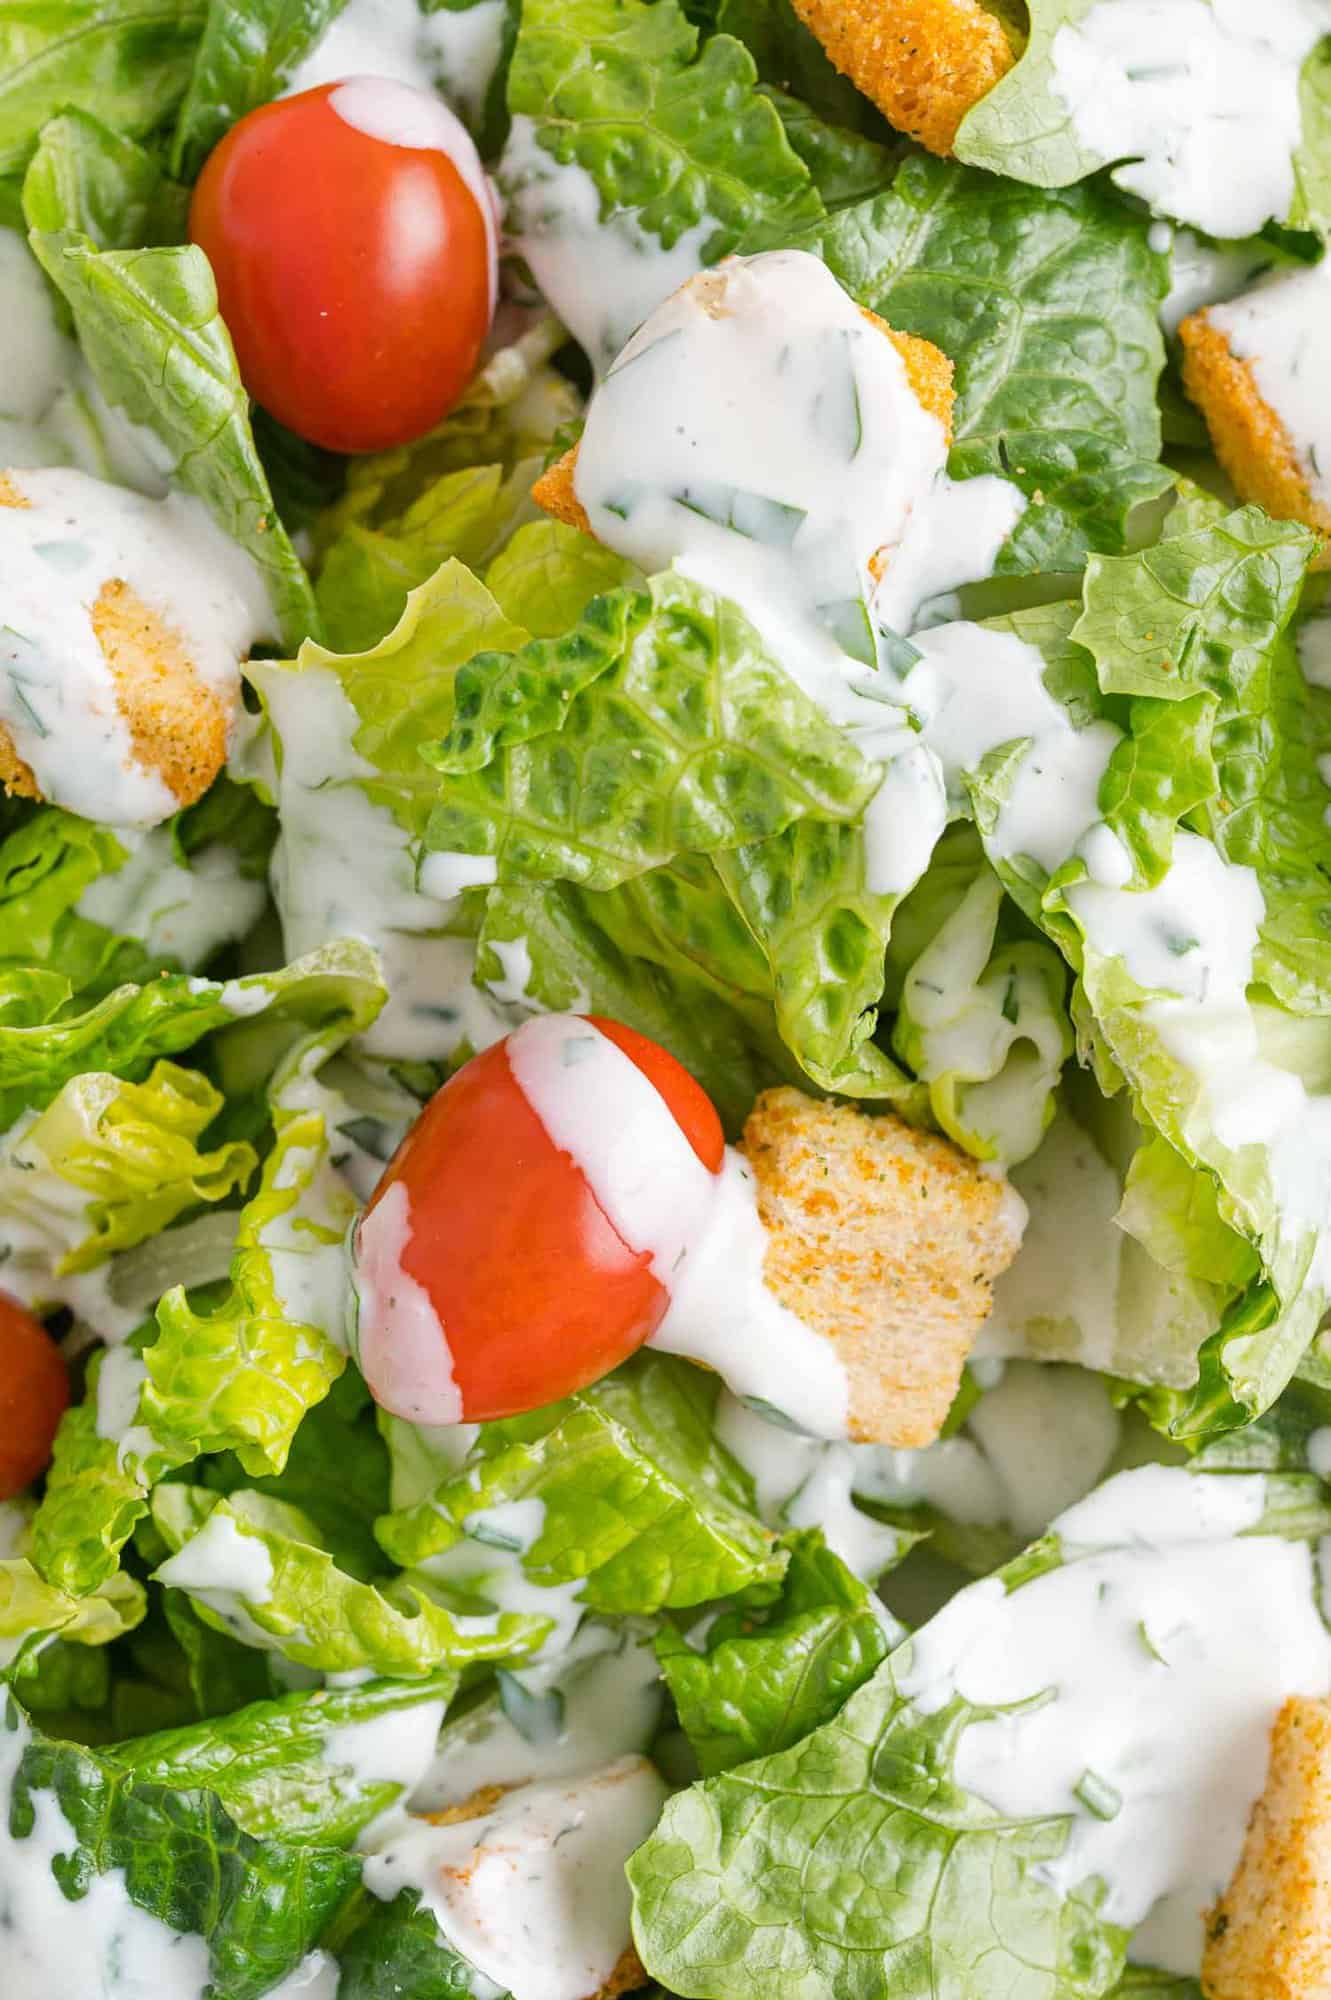 Ranch dressing drizzled on a traditional green tossed salad.